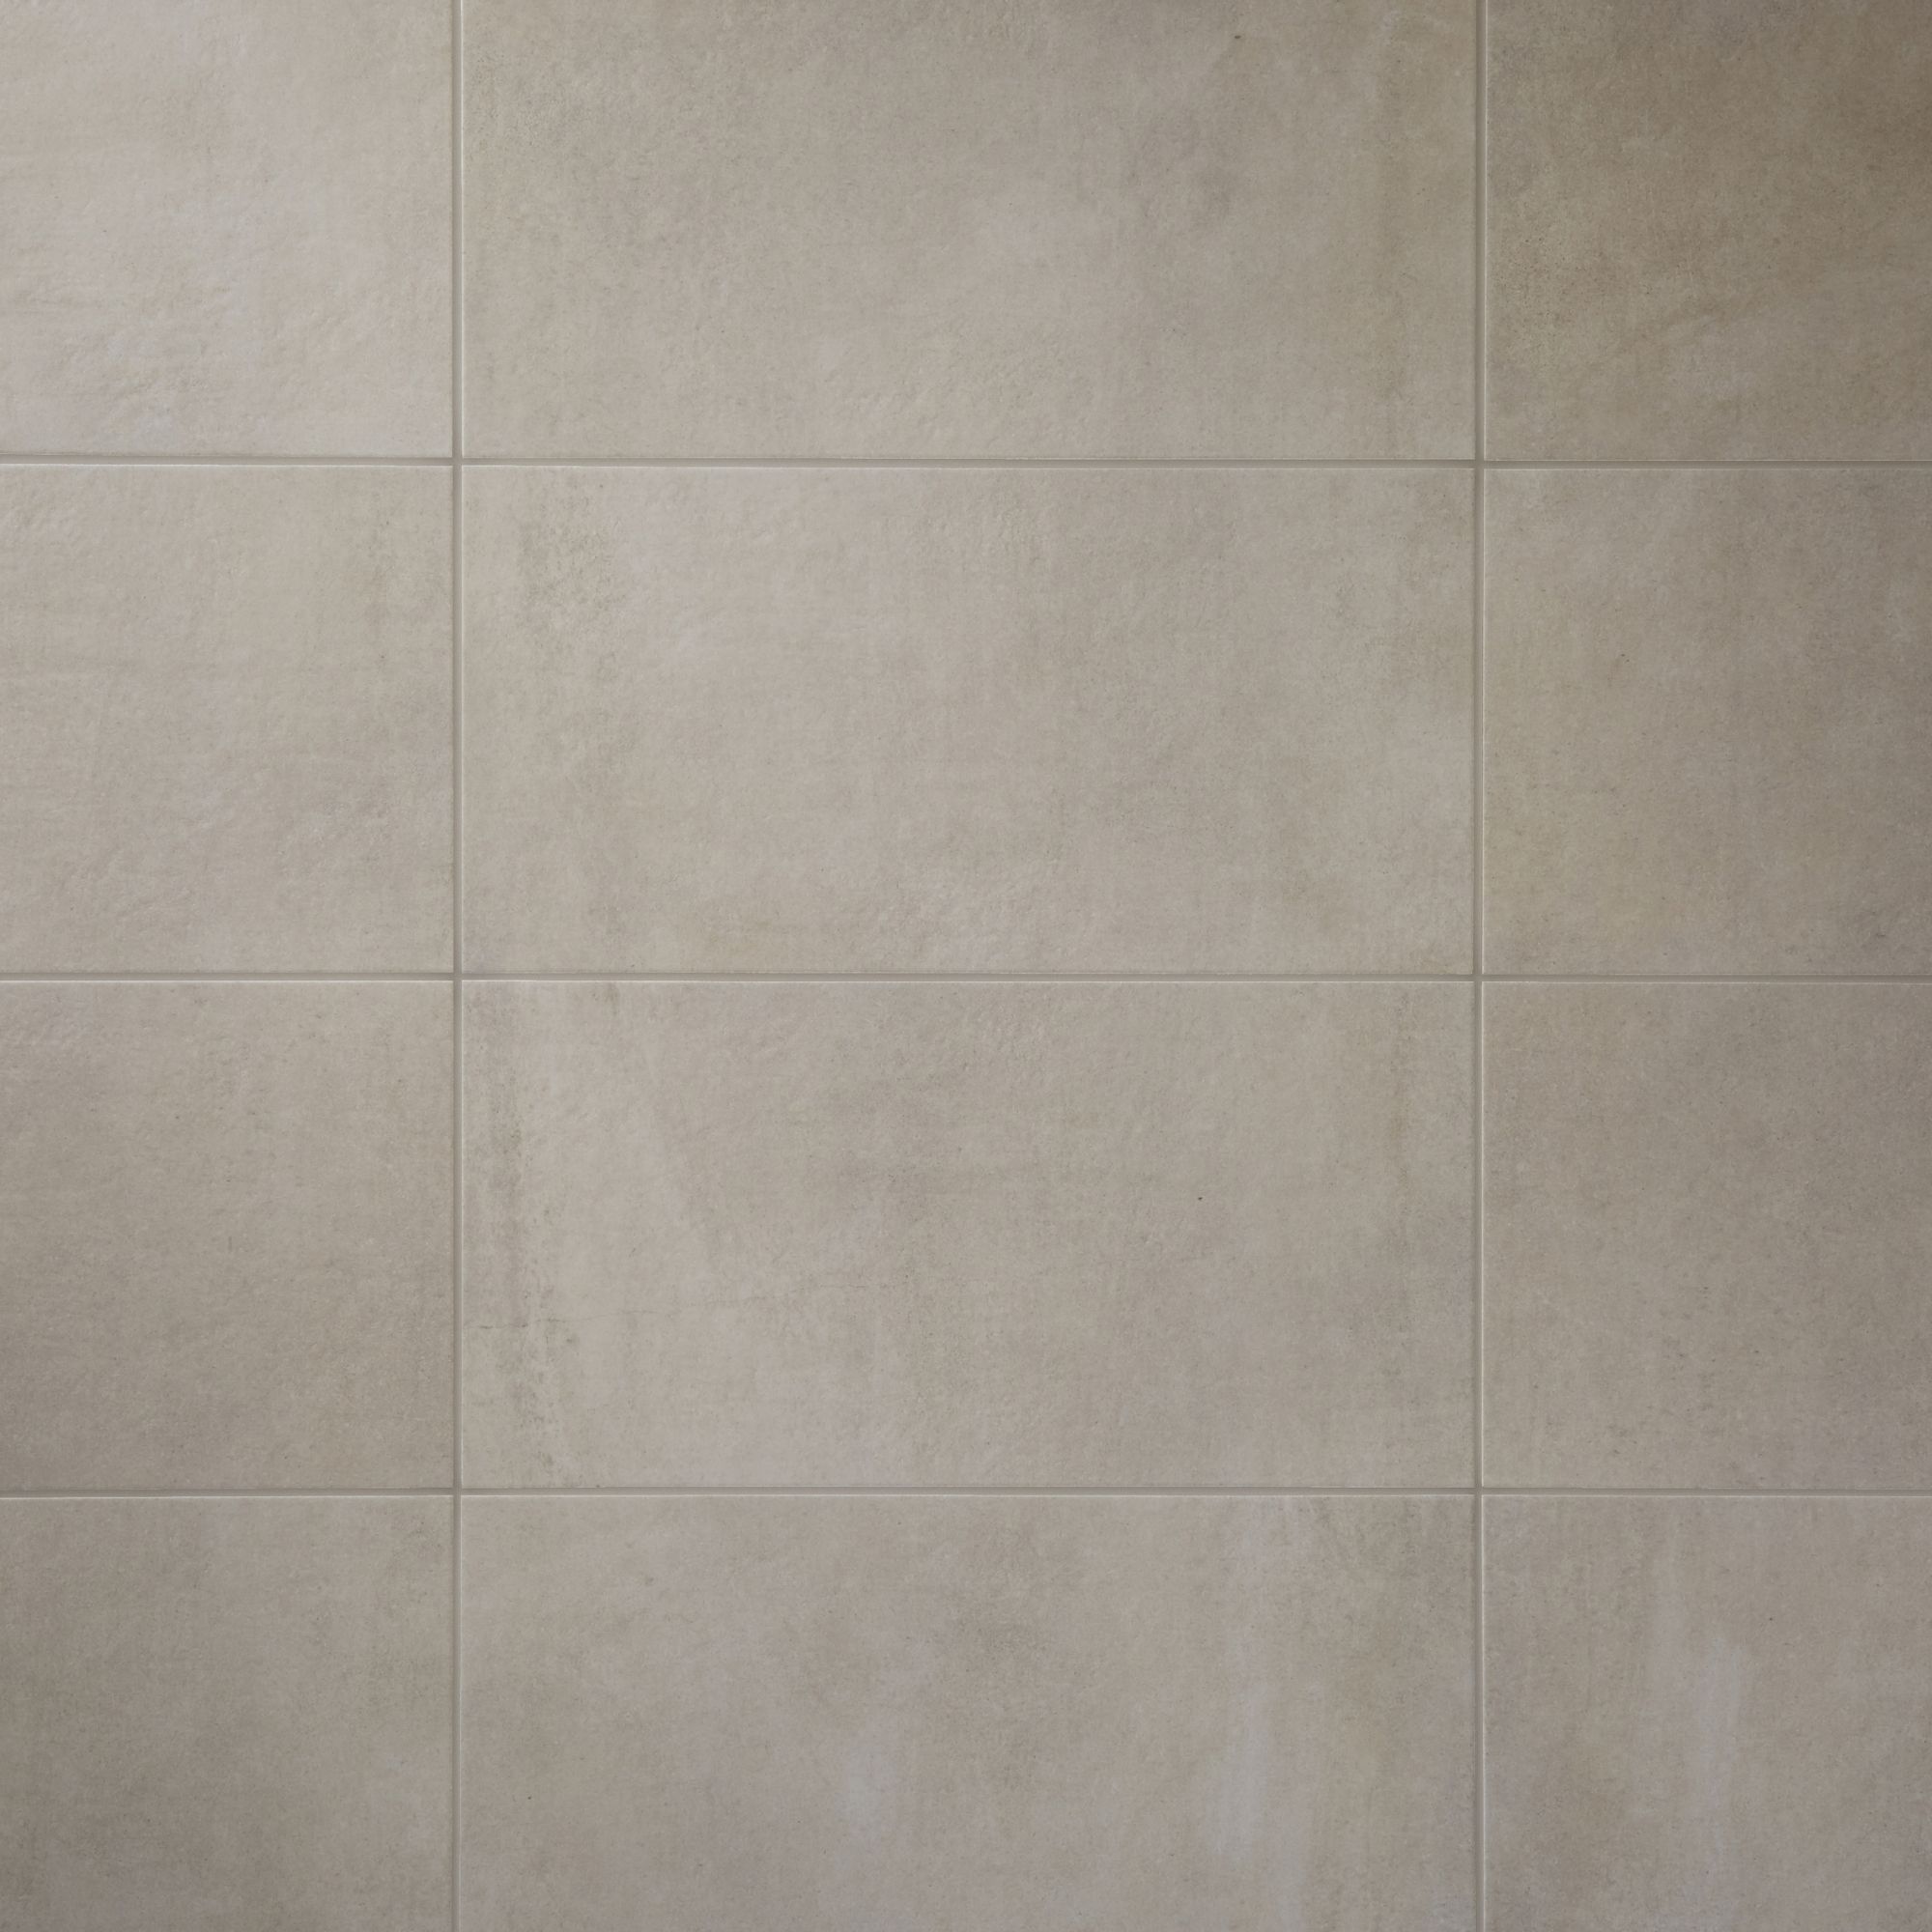 Colours Structured Off white Matt Concrete effect Textured Porcelain Indoor Wall & floor Tile, Pack of 6, (L)600mm (W)300mm